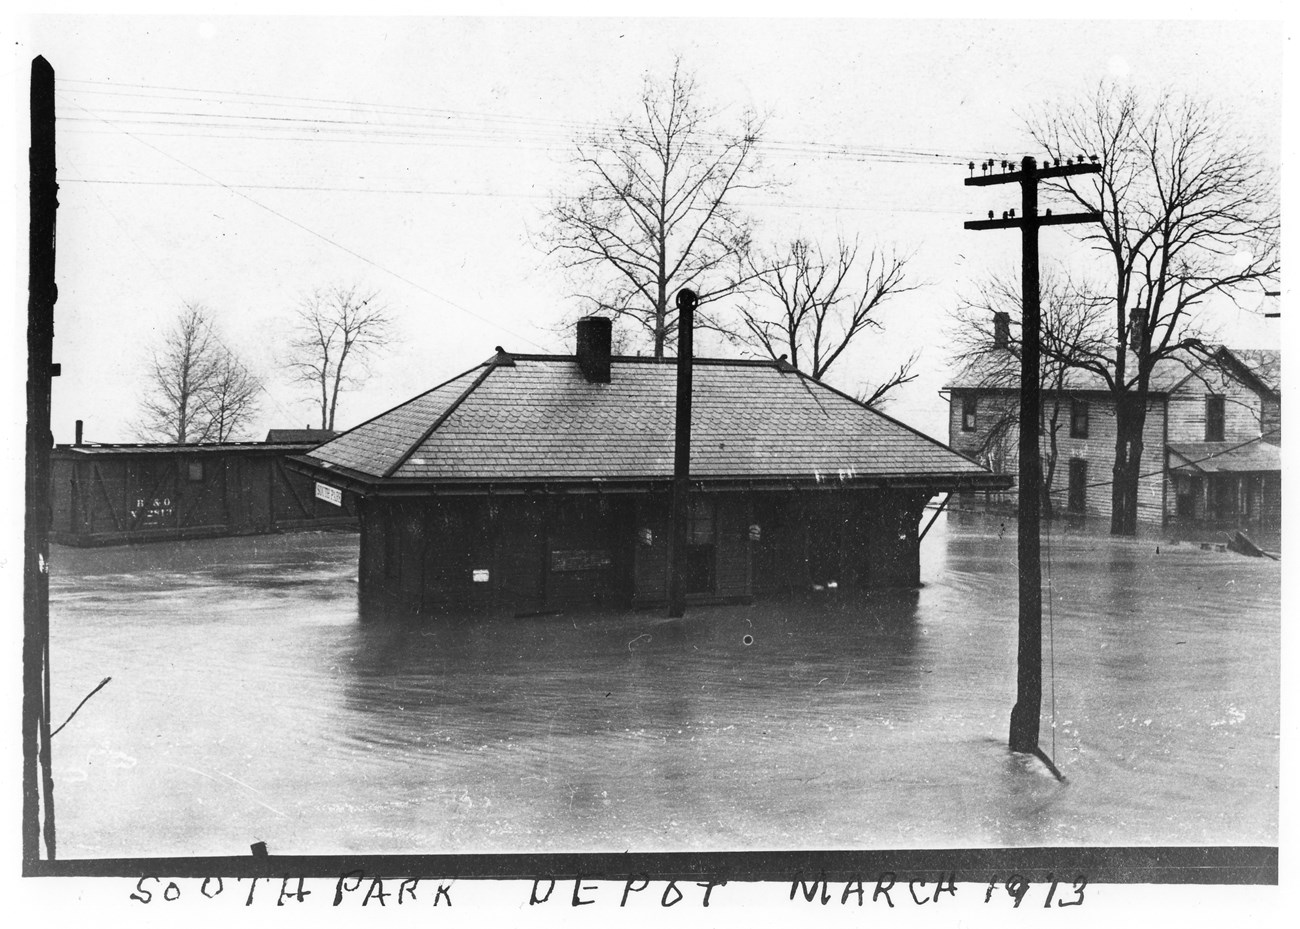 Black and white flood scene showing a one-story station, a train car, an electric pole, and a two-story wooden house. The depot has a “South Park” sign.